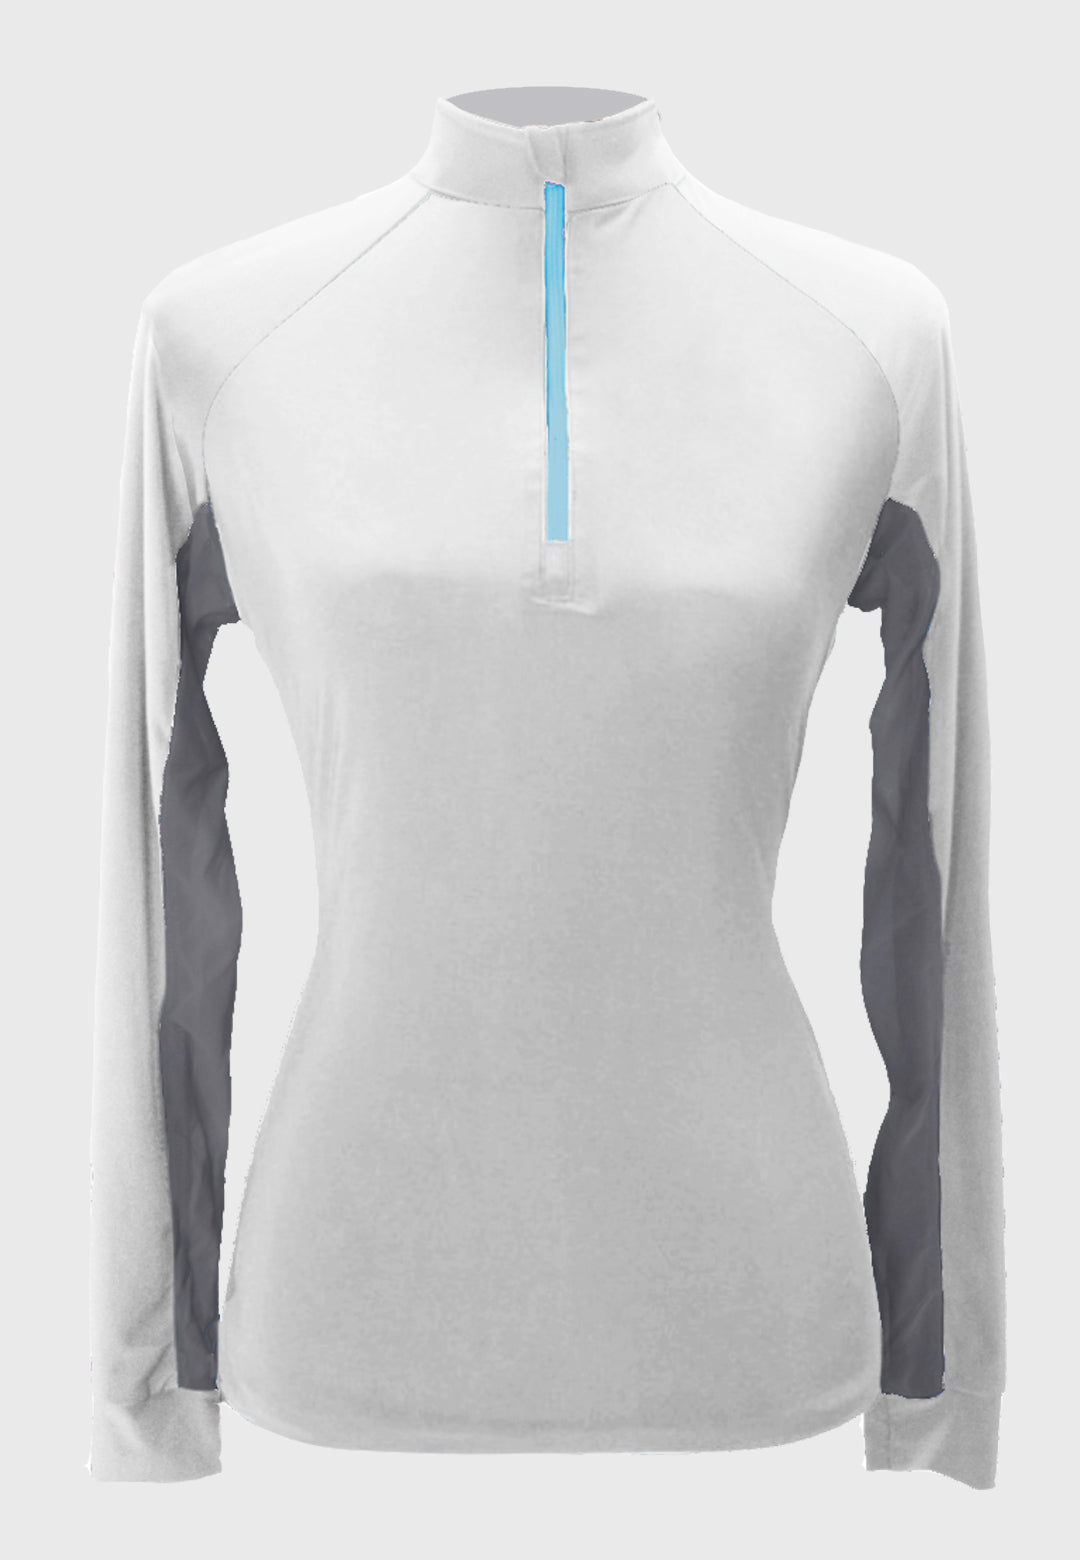 Dynamic Equestrian Custom Sun Shirt - White with Grey Vents   Adult + Youth Sizes